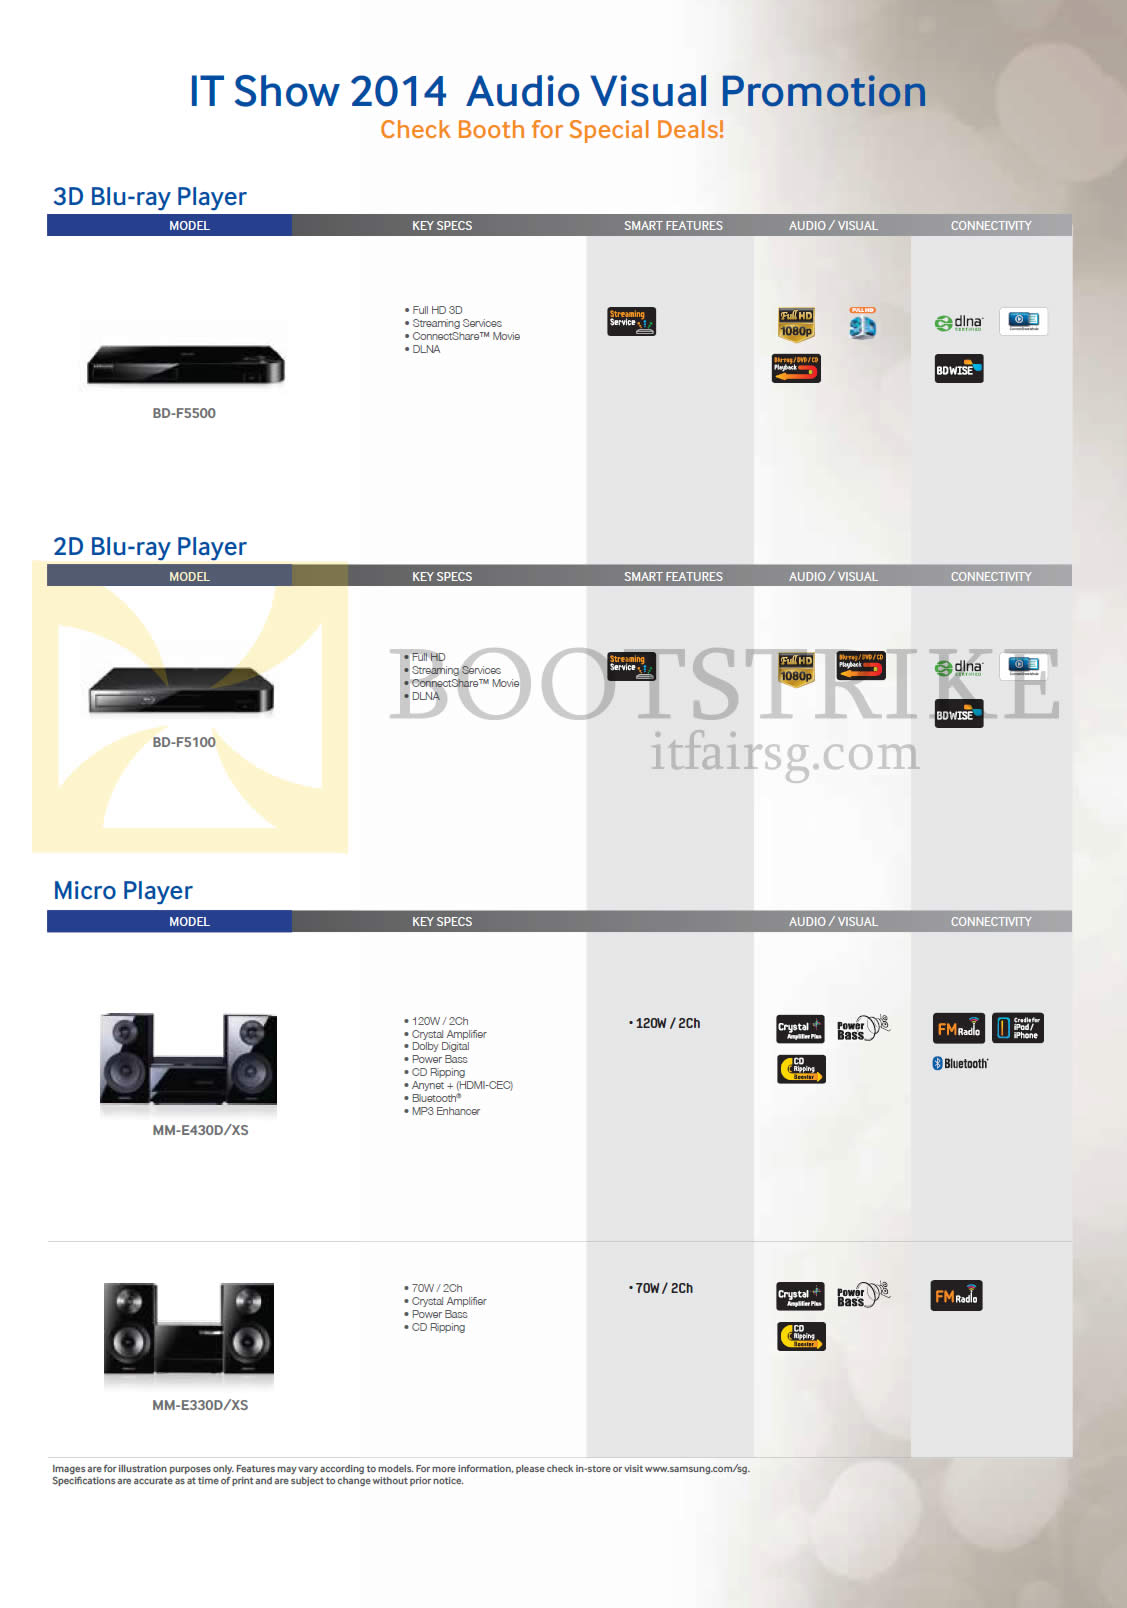 IT SHOW 2014 price list image brochure of Samsung Mega (No Prices) Blu Ray Players, Micro Players, BD-F5500, F5100, MM-E430D, E330D